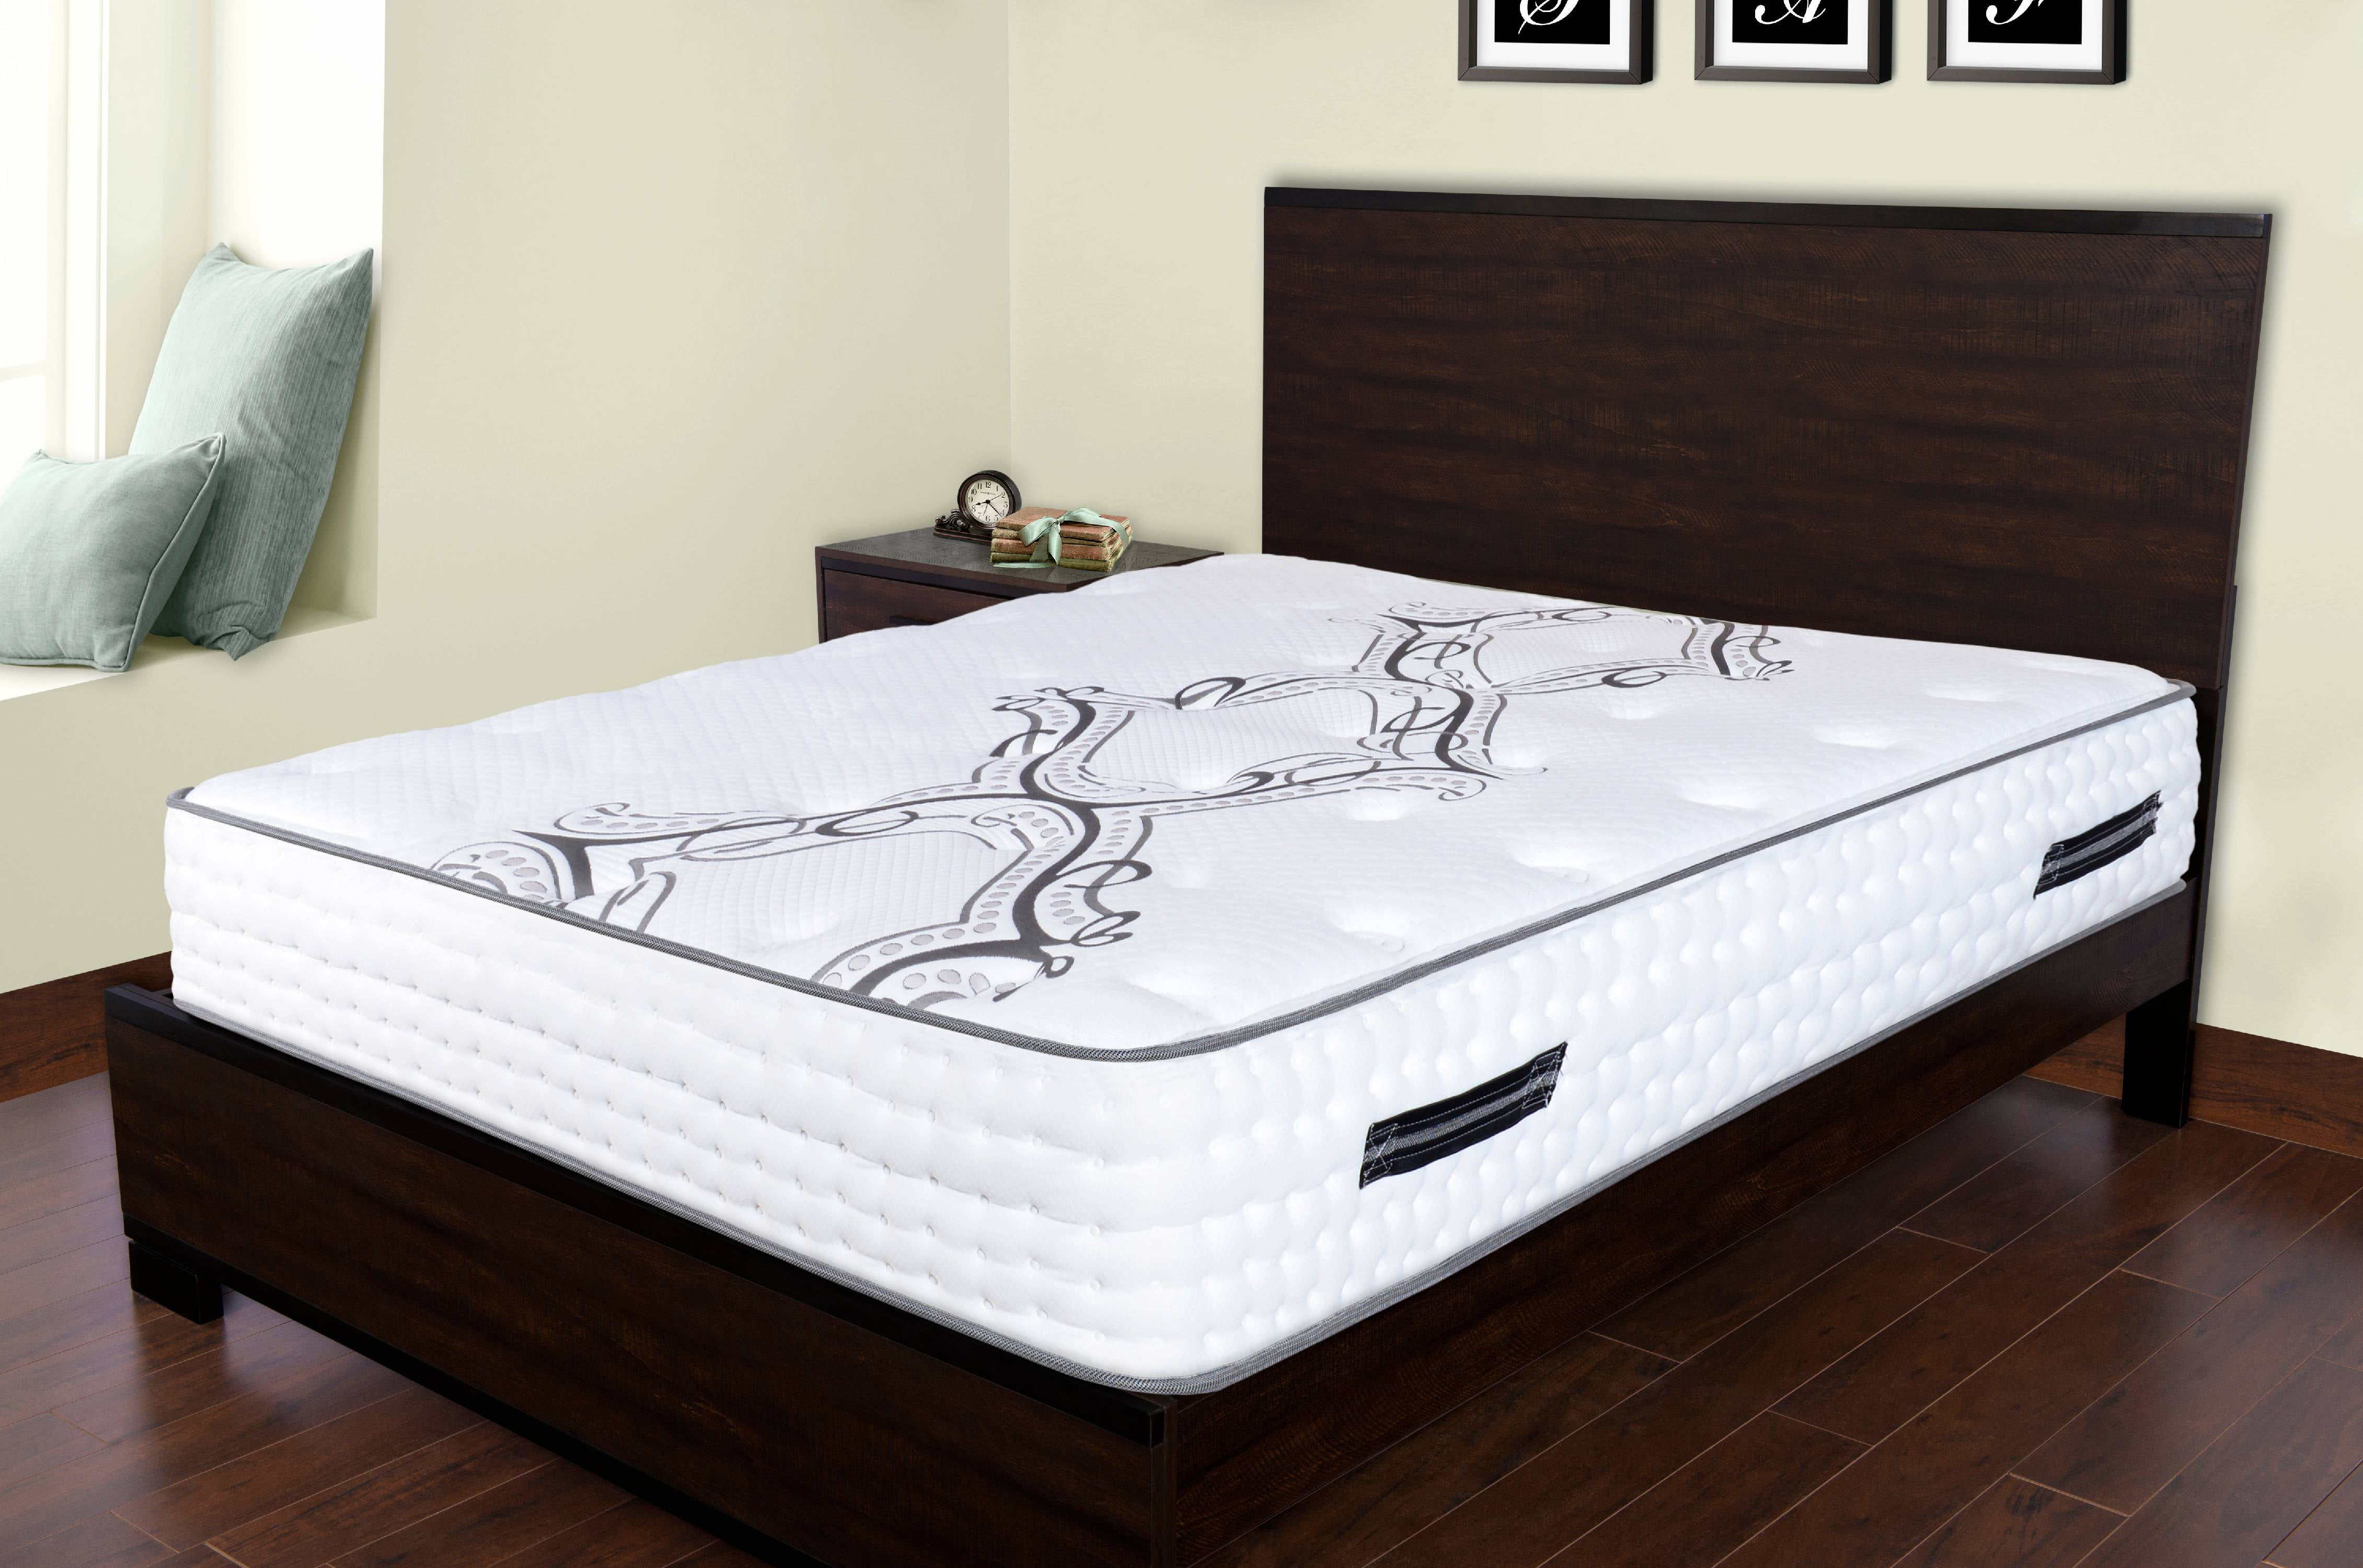 Buttersoft - Magic- Semi Othopedic Mattress, Ideal for All Ages